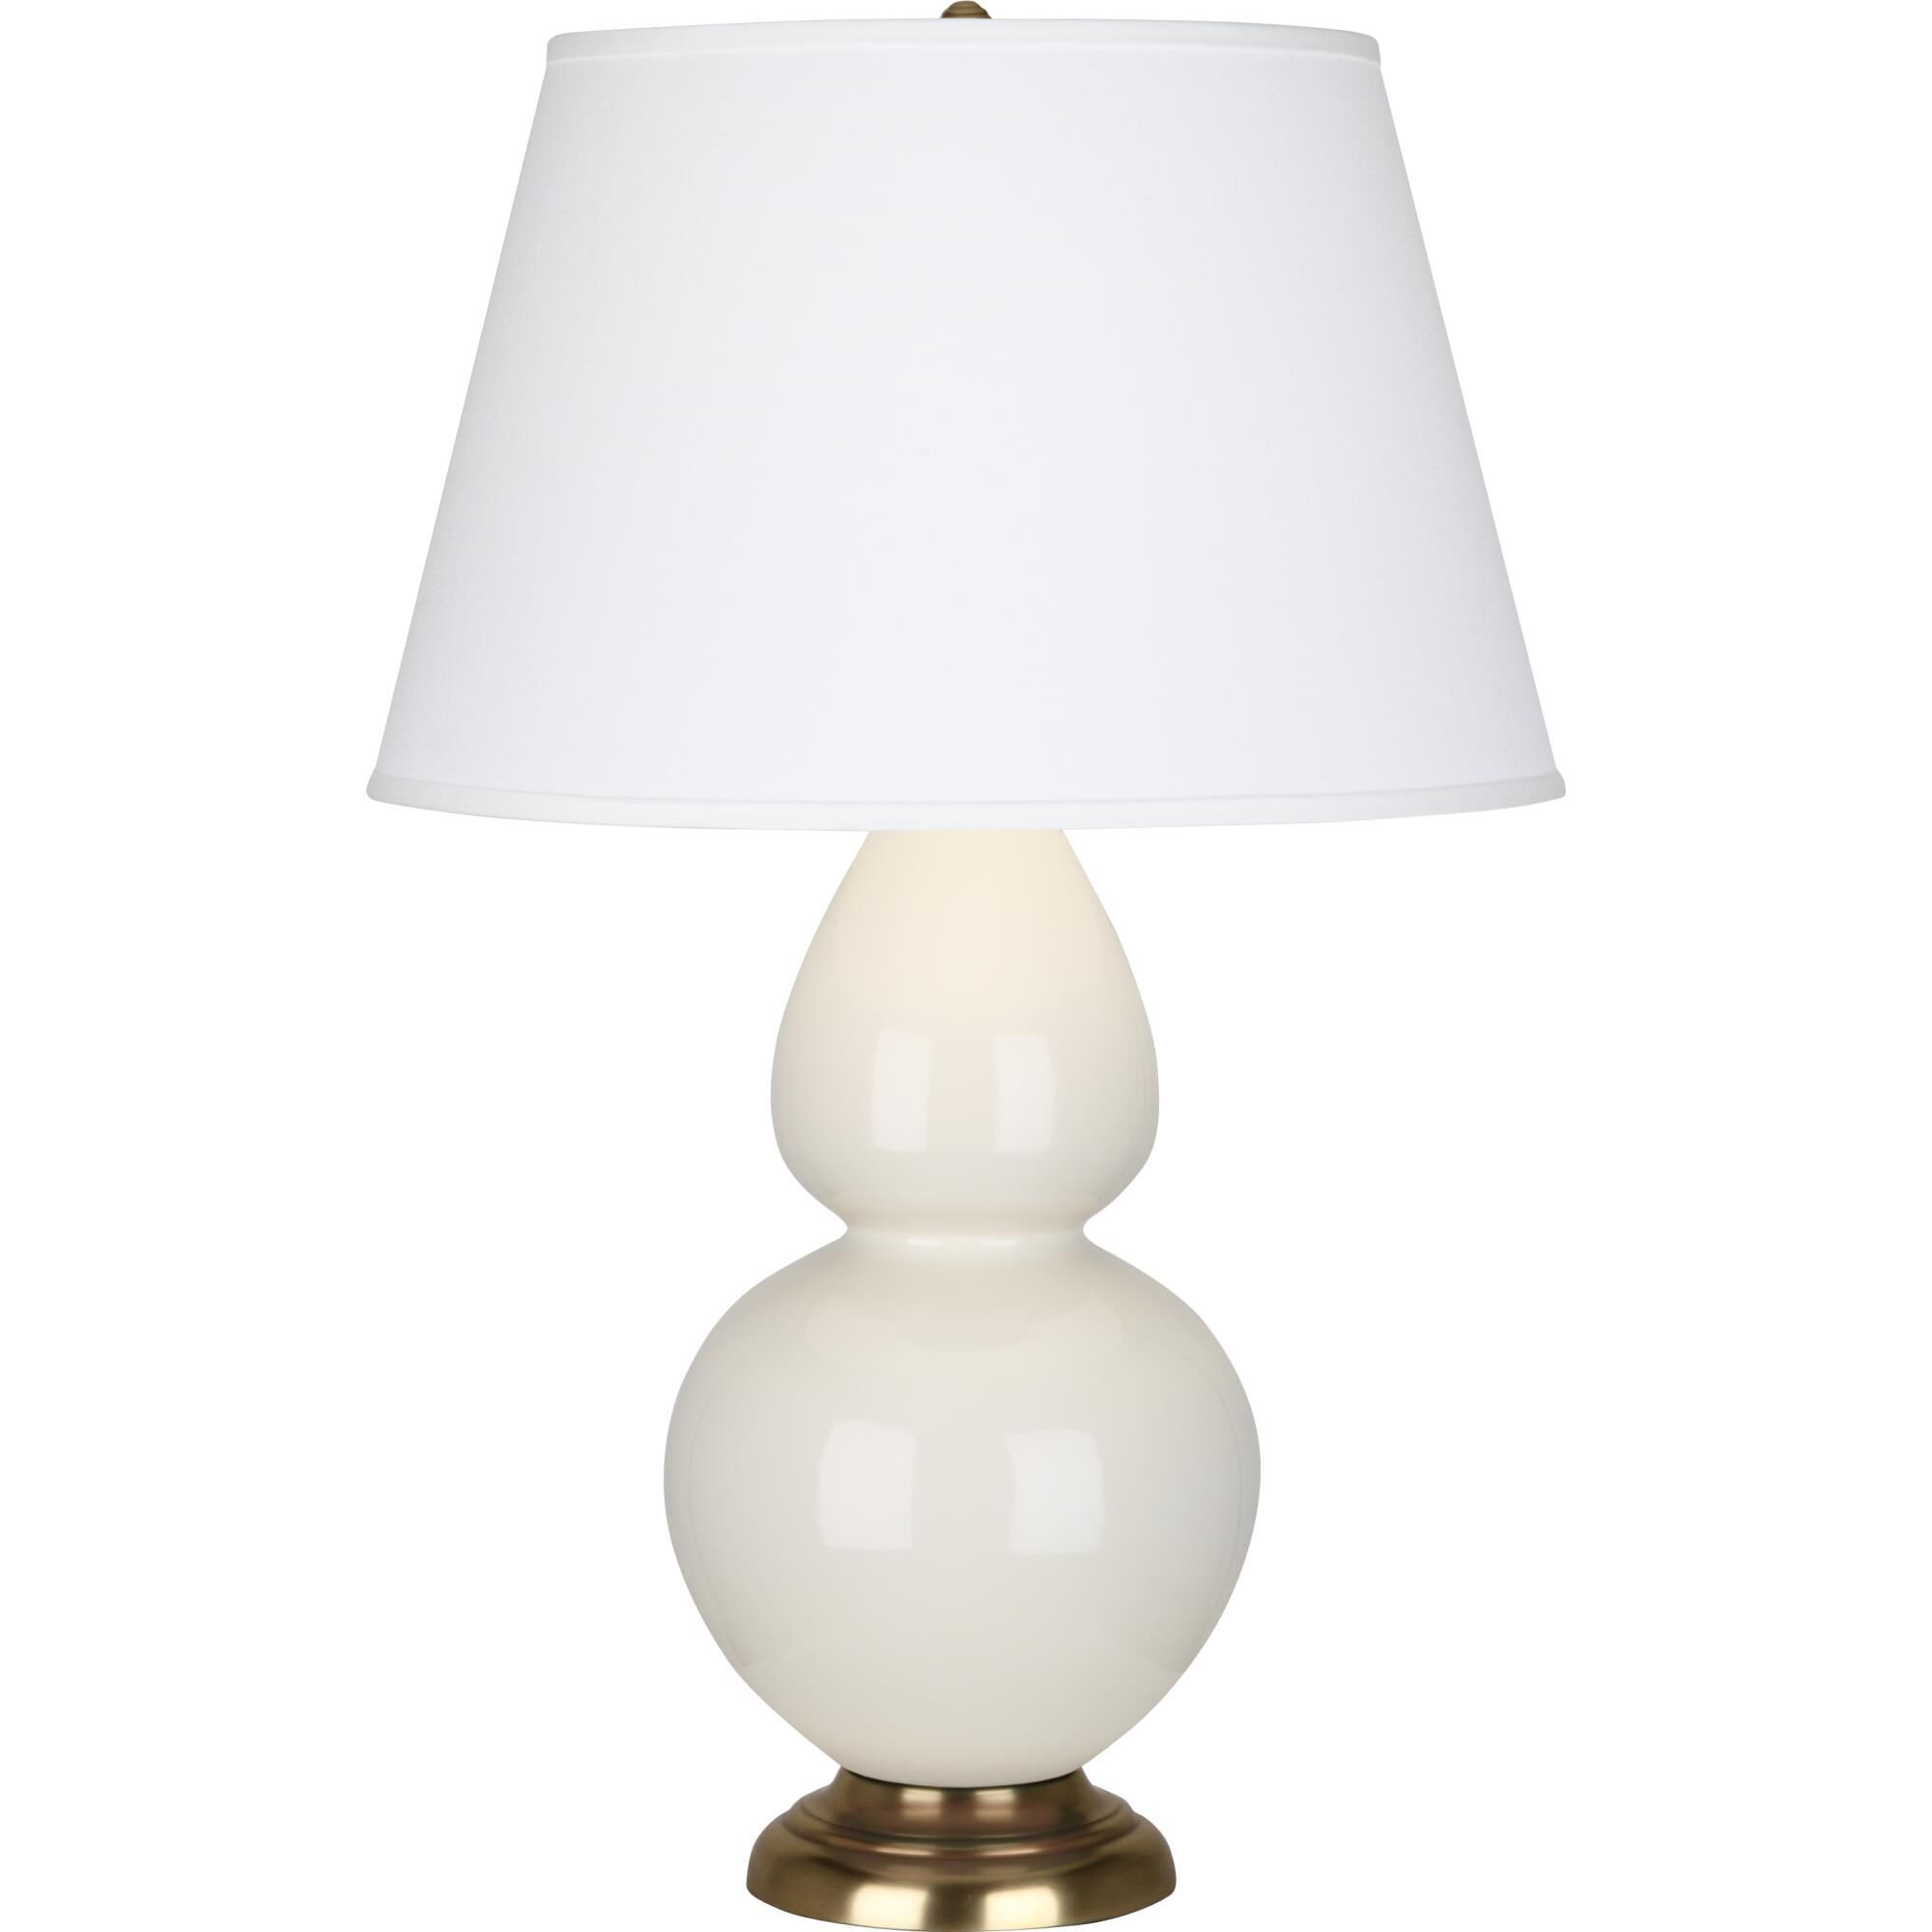 Double Gourd 31 Inch Table Lamp by Robert Abbey | Capitol Lighting 1800lighting.com